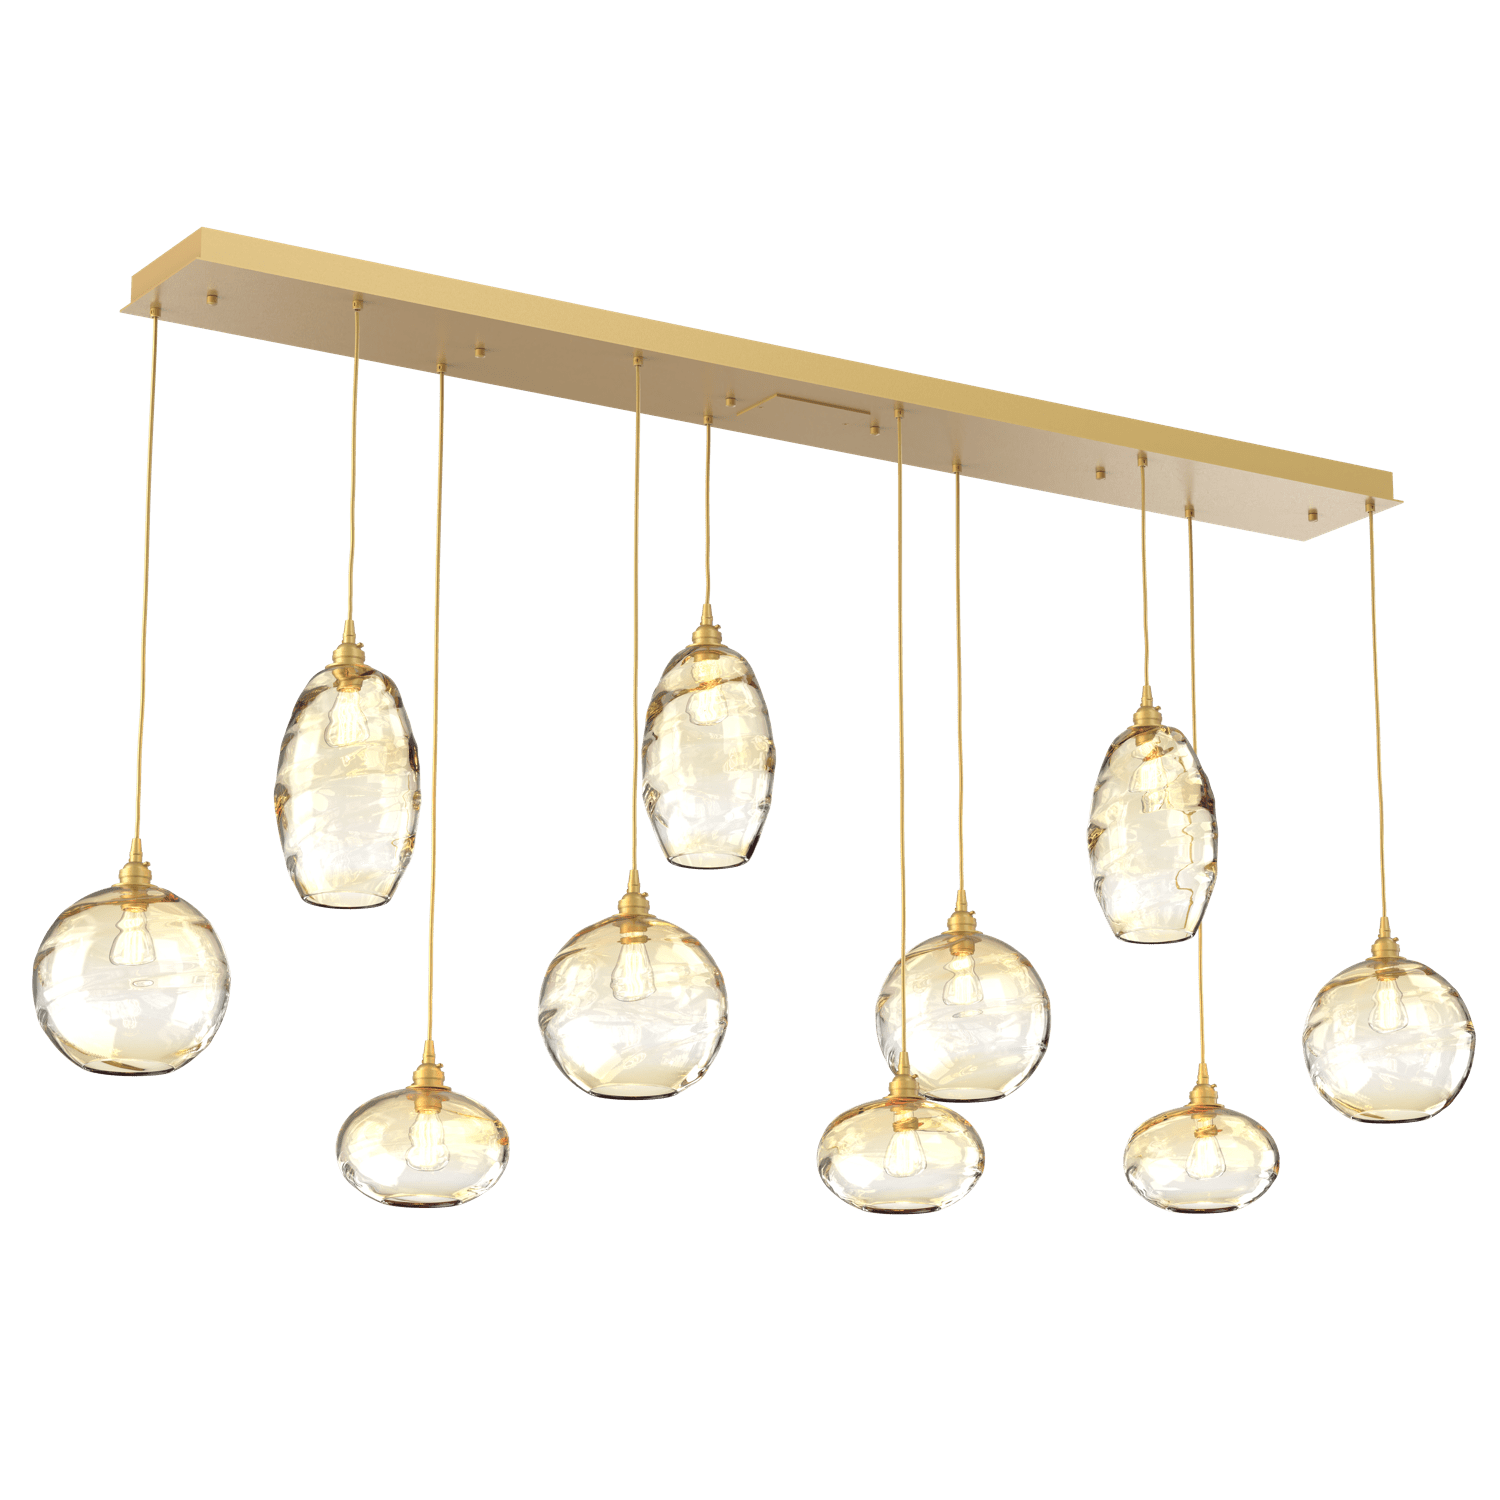 PLB0048-10-GB-OA-Hammerton-Studio-Optic-Blown-Glass-Misto-10-light-linear-pendant-chandelier-with-gilded-brass-finish-and-optic-amber-blown-glass-shades-and-incandescent-lamping